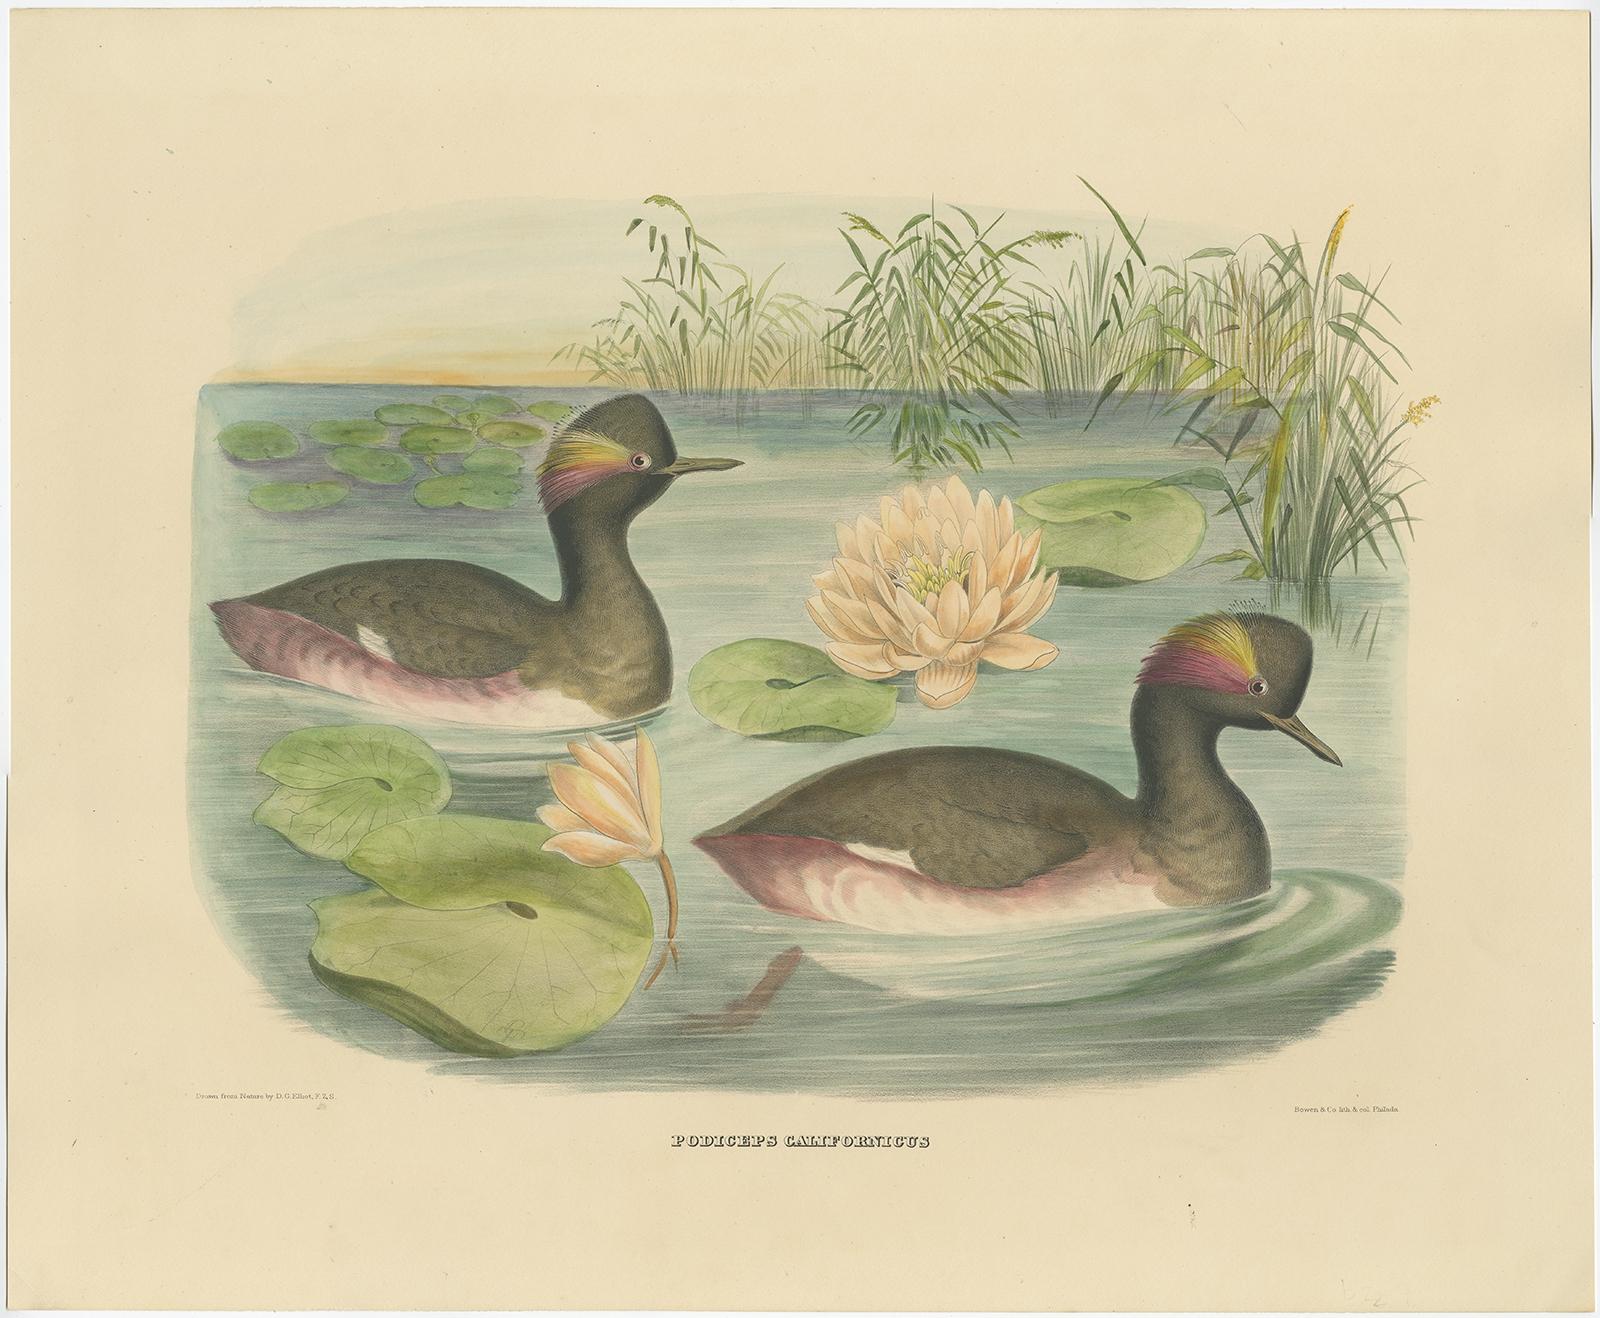 **Title:** Antique Bird Print - 'Podiceps californicus'

**Description:**

Journey back in time with this captivating antique lithograph from the esteemed work of Daniel Giraud Elliot, 'The New and Heretofore Unfigured Species of the Birds of North